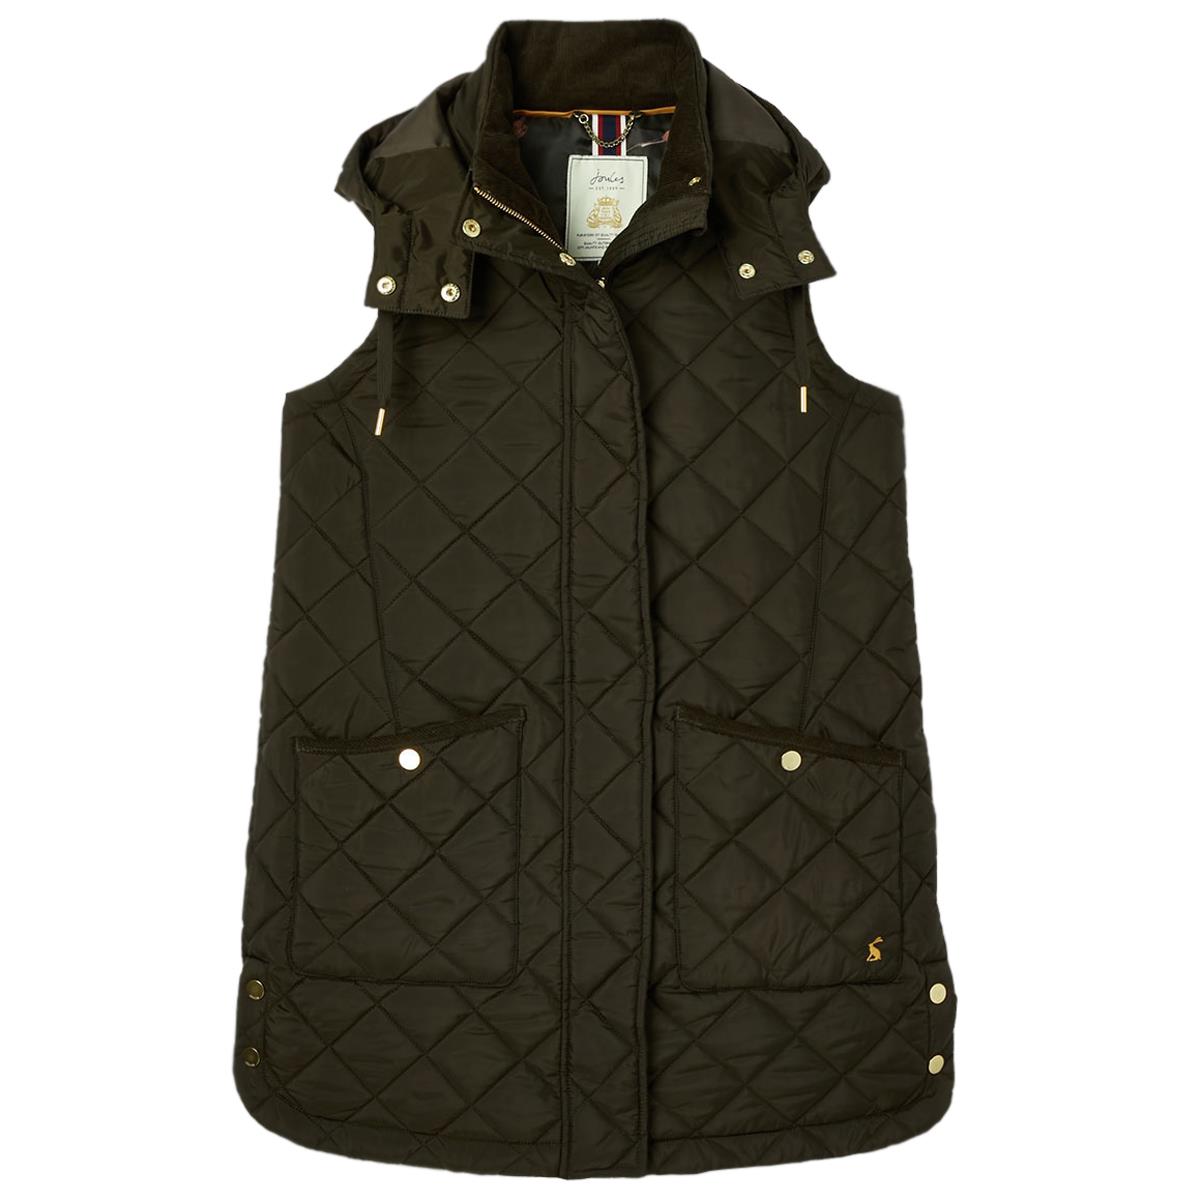 What's your opinion on the fit of the Joules Chatham Gilet?